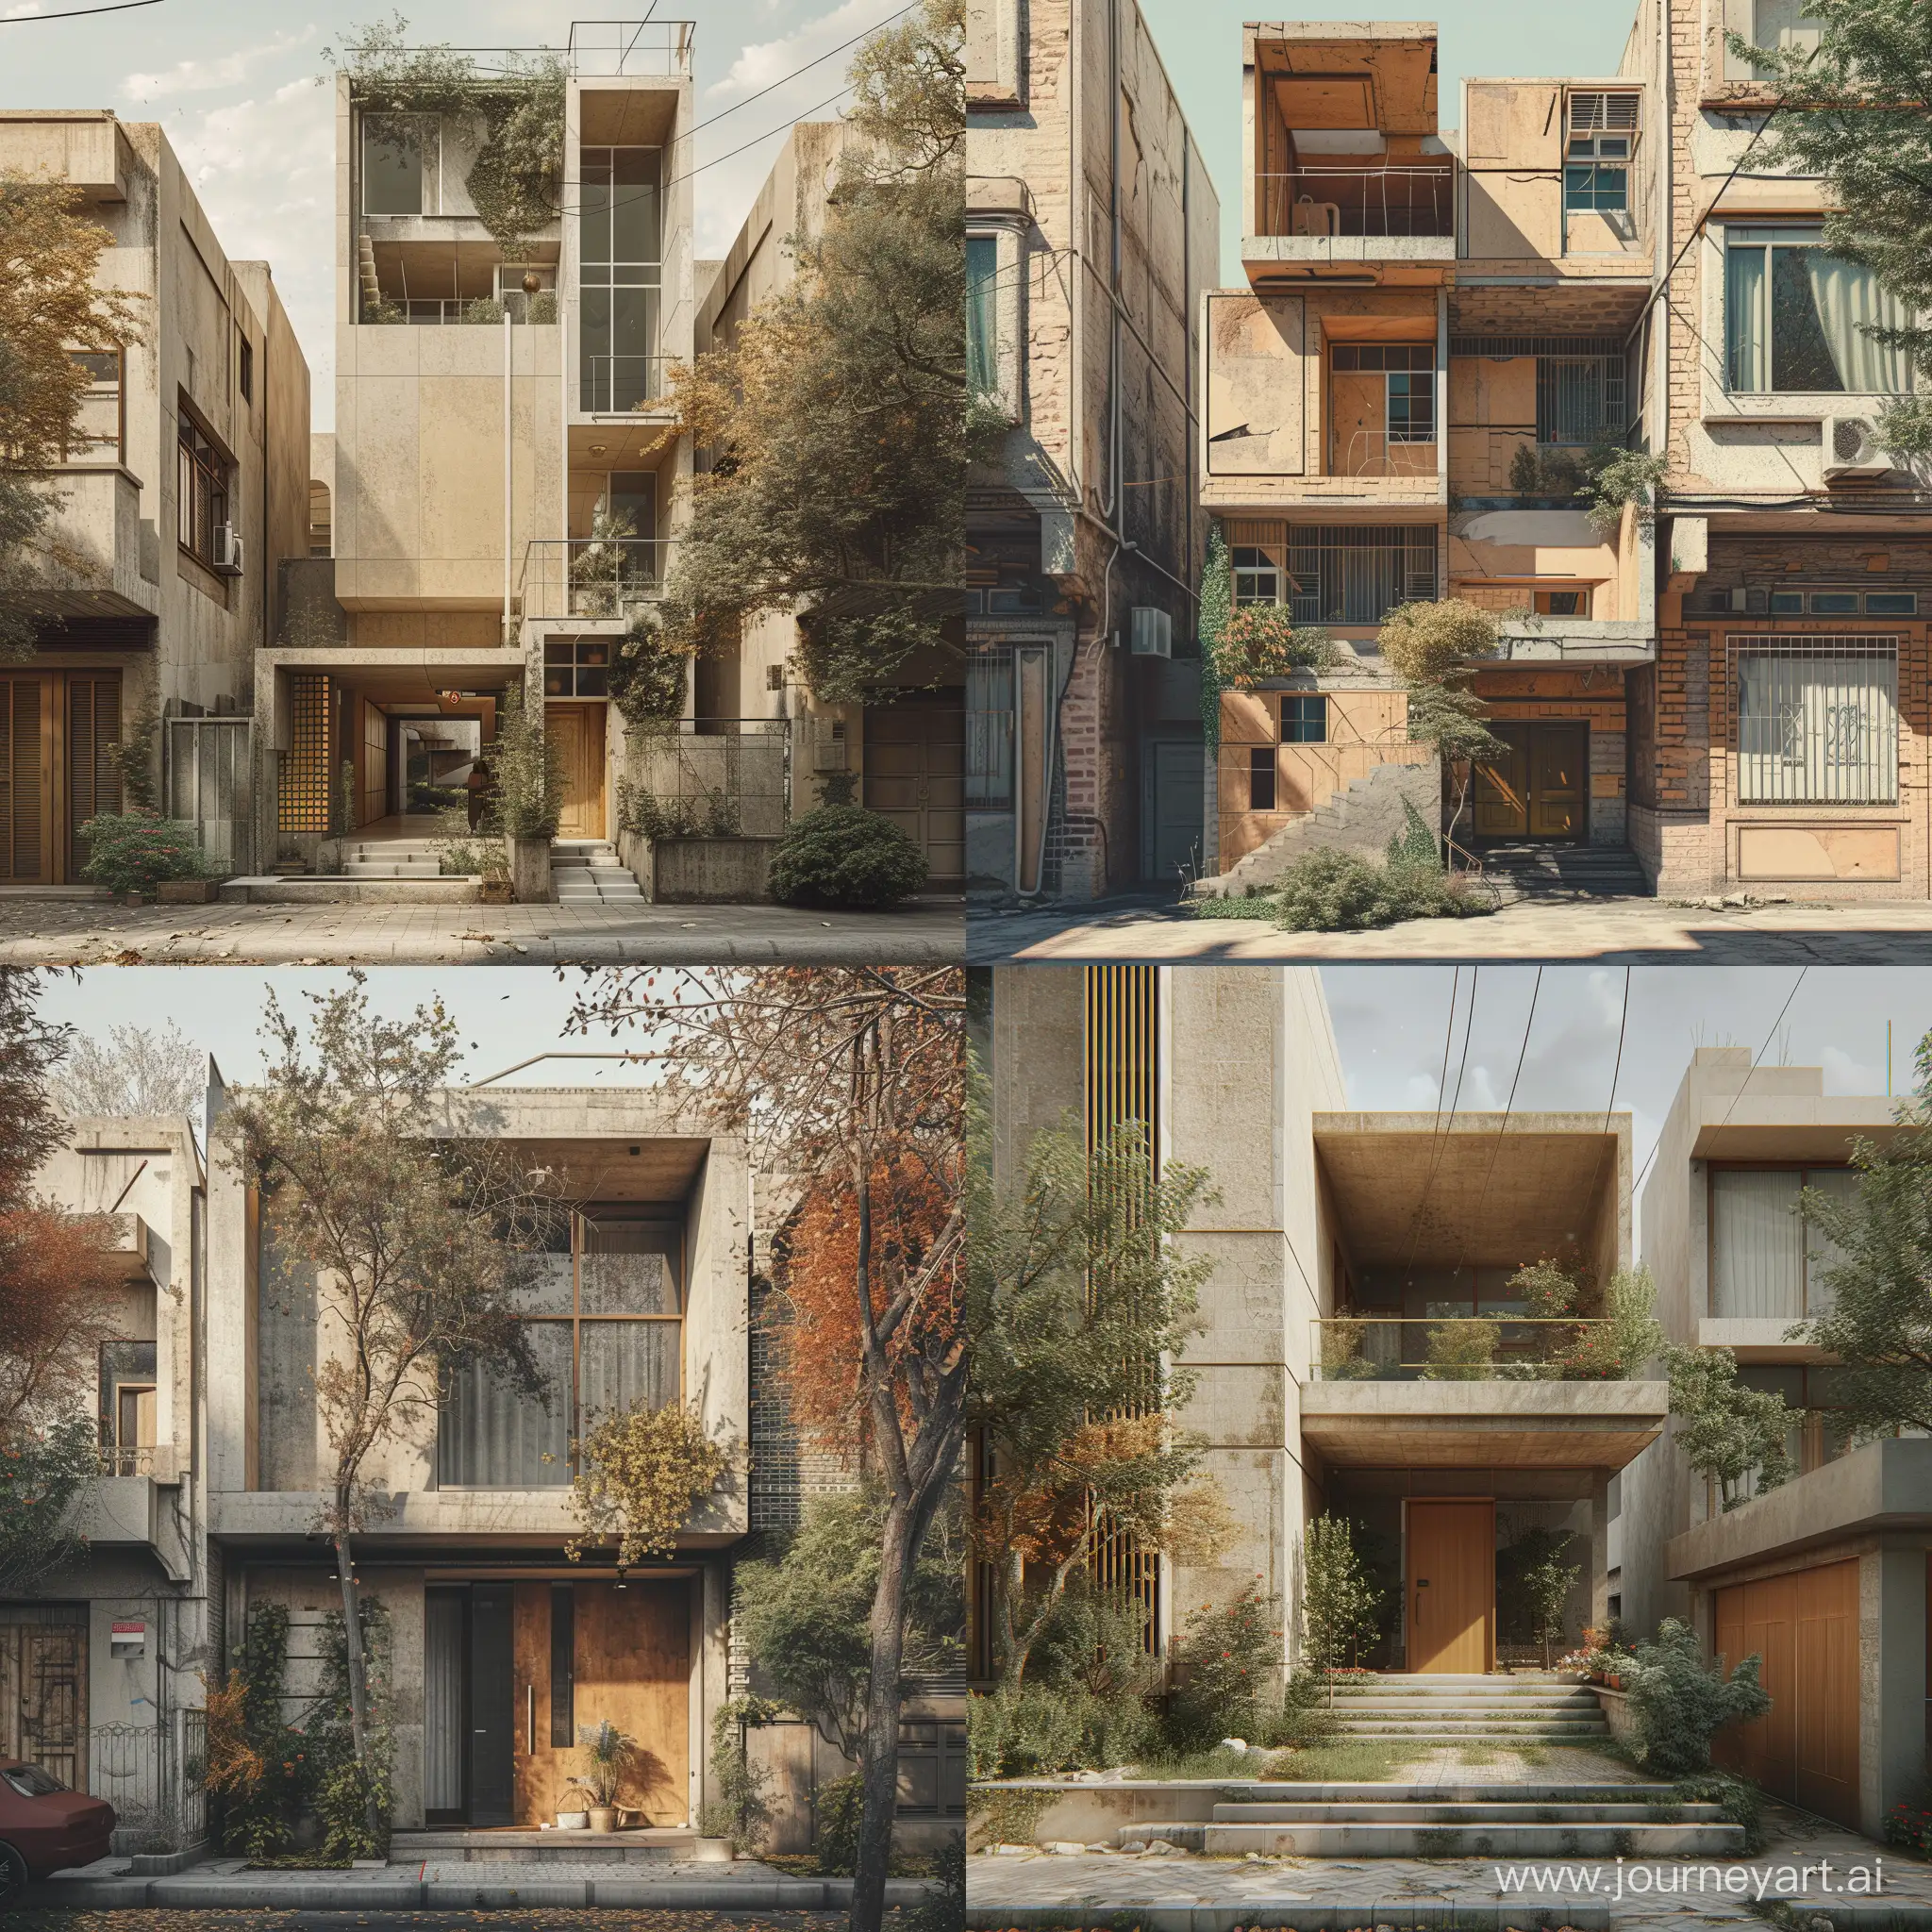 Urban-Collage-Architecture-in-Tehran-Entrance-of-Houses-with-African-Brutalism-Elements